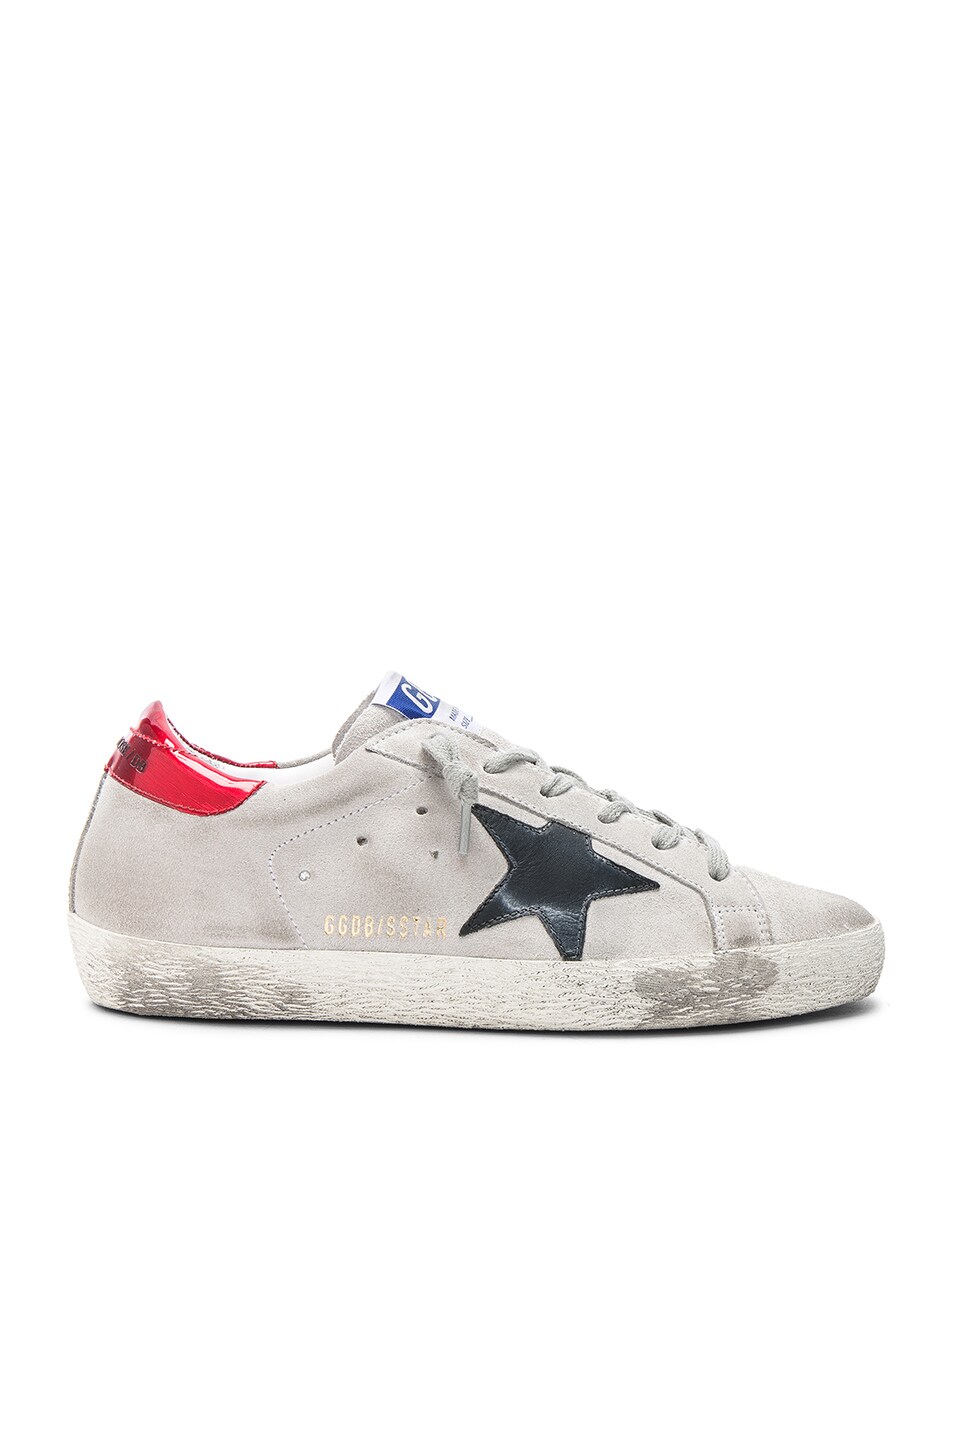 Image 1 of Golden Goose Suede Superstar Sneakers in Pear & Traffic Light